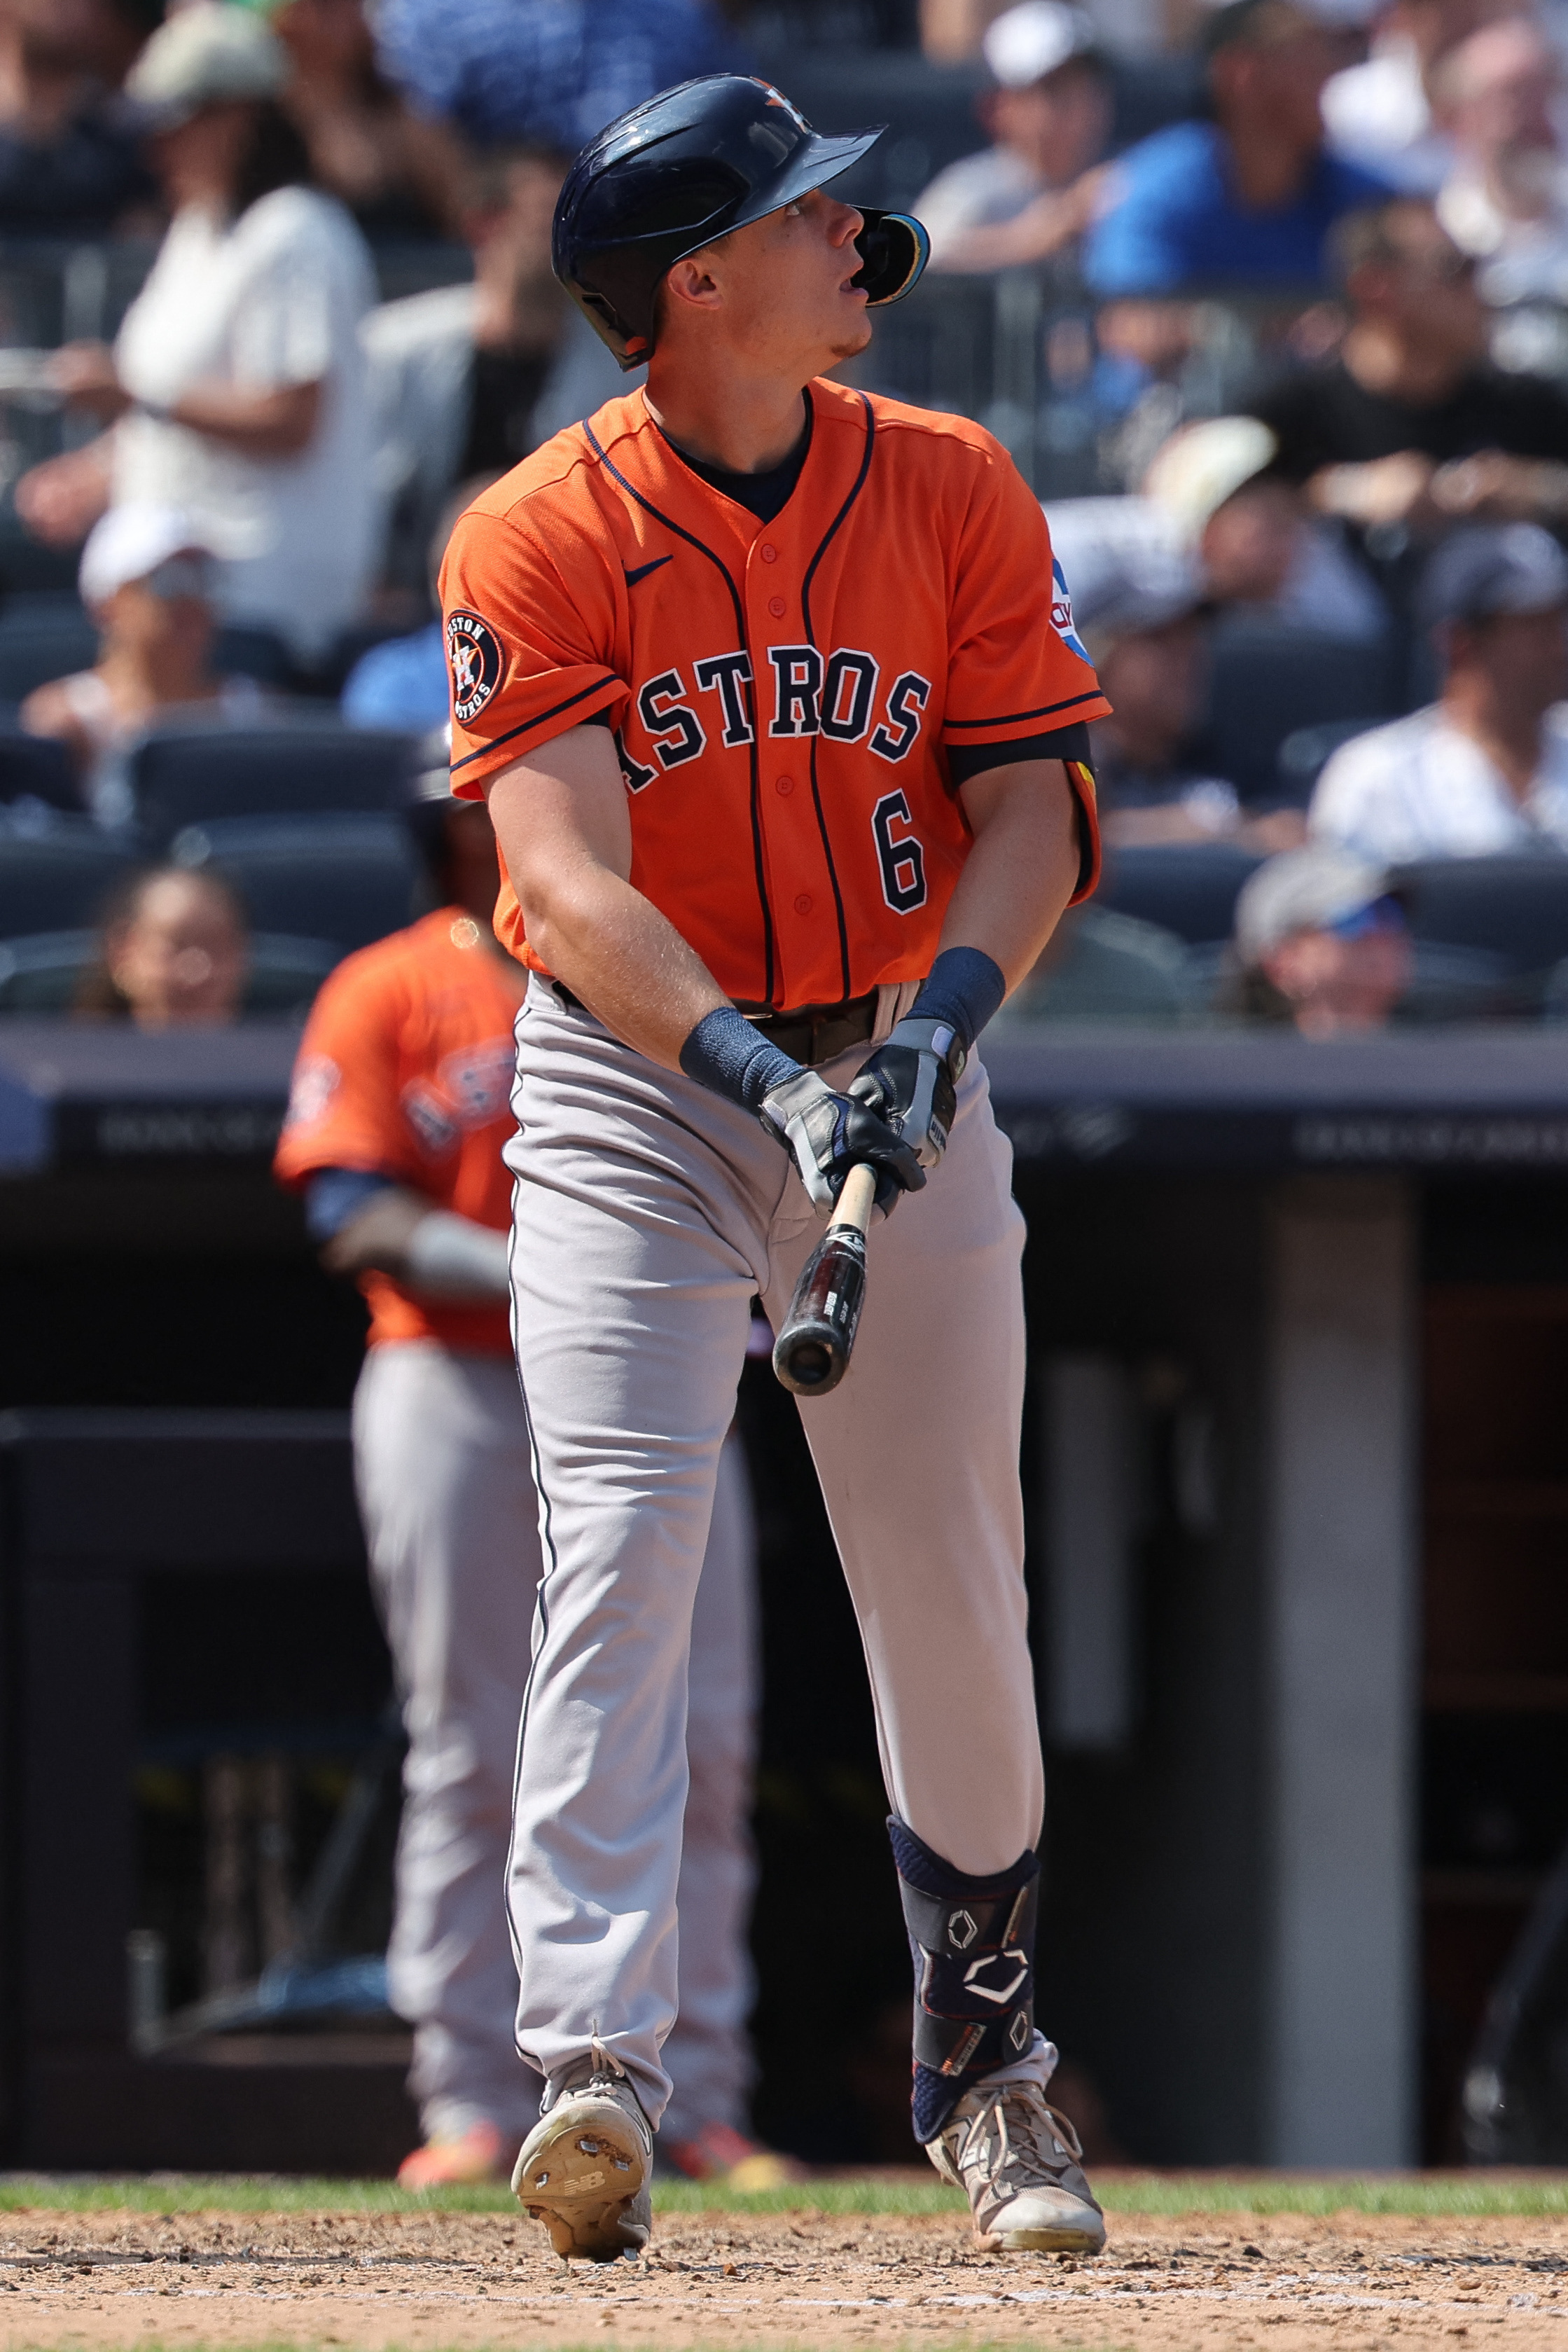 Jake Meyers hits 2 HRs, carries Astros past Yankees